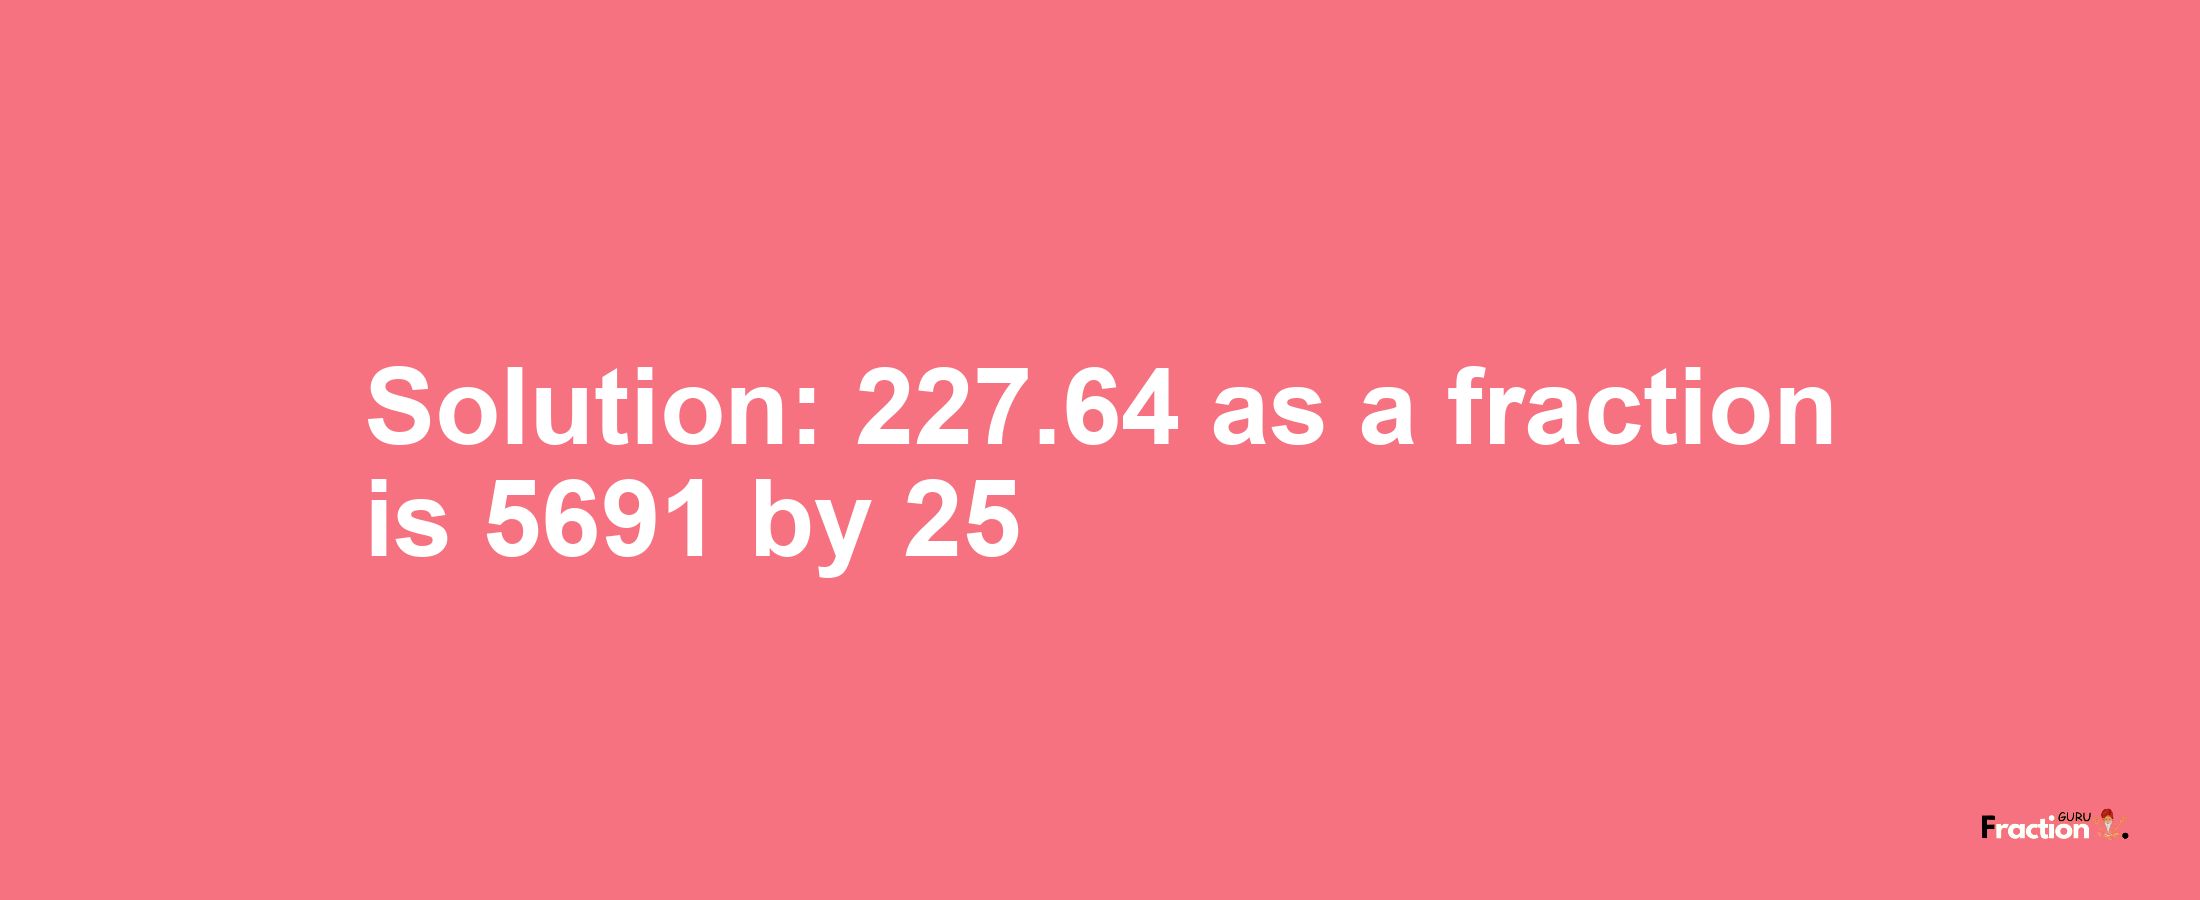 Solution:227.64 as a fraction is 5691/25